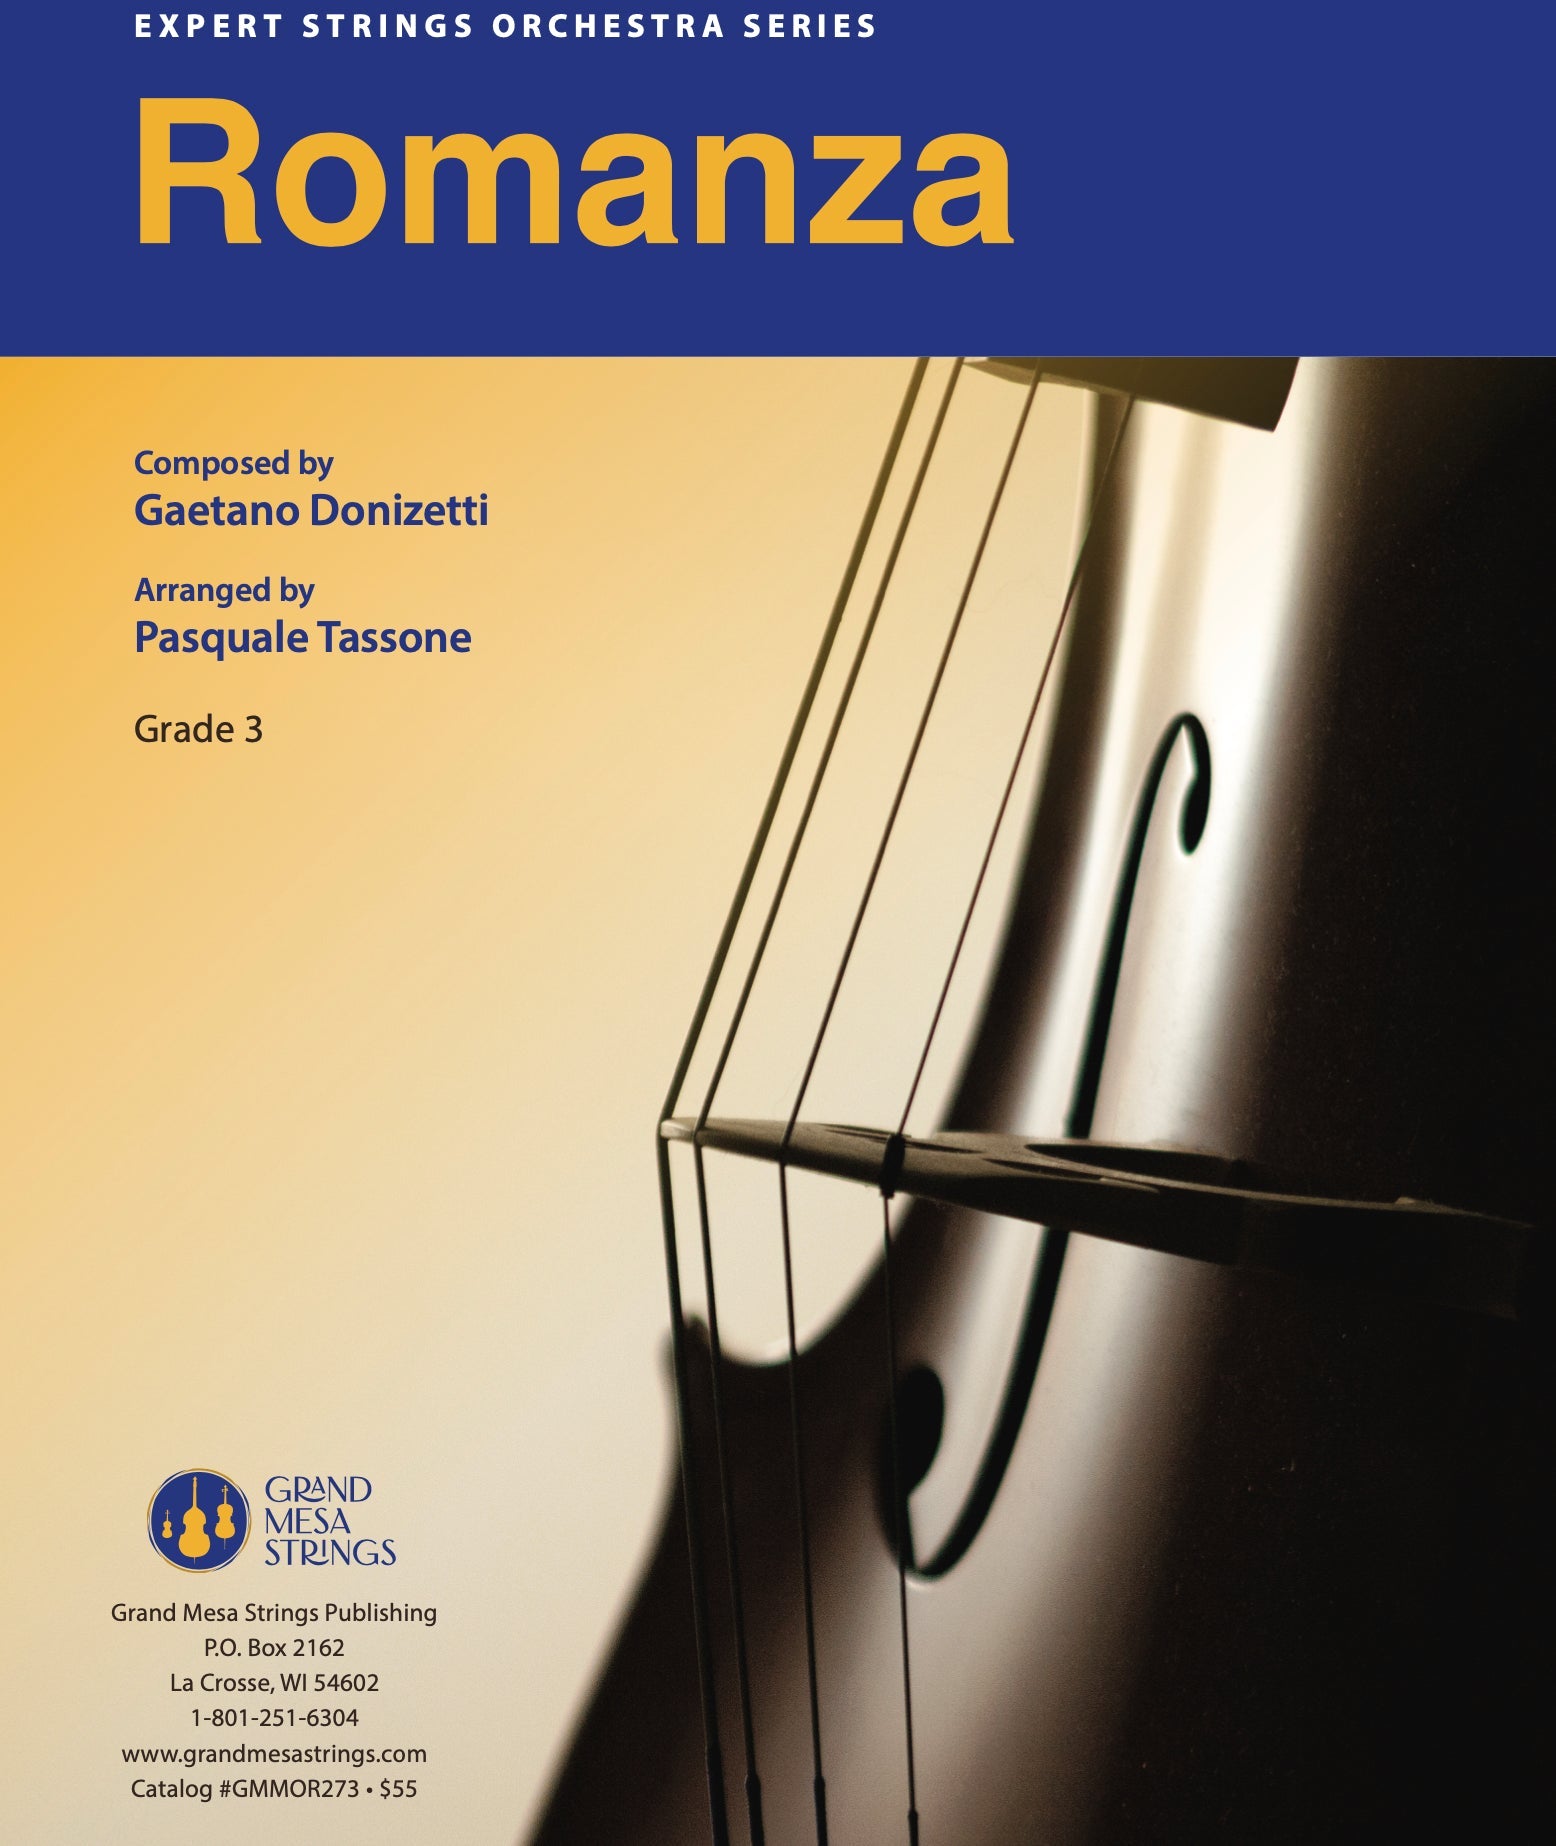 Strings sheet music cover of Romanza, composed by Gaetano Donizetti, arranged by Pasquale Tassone.